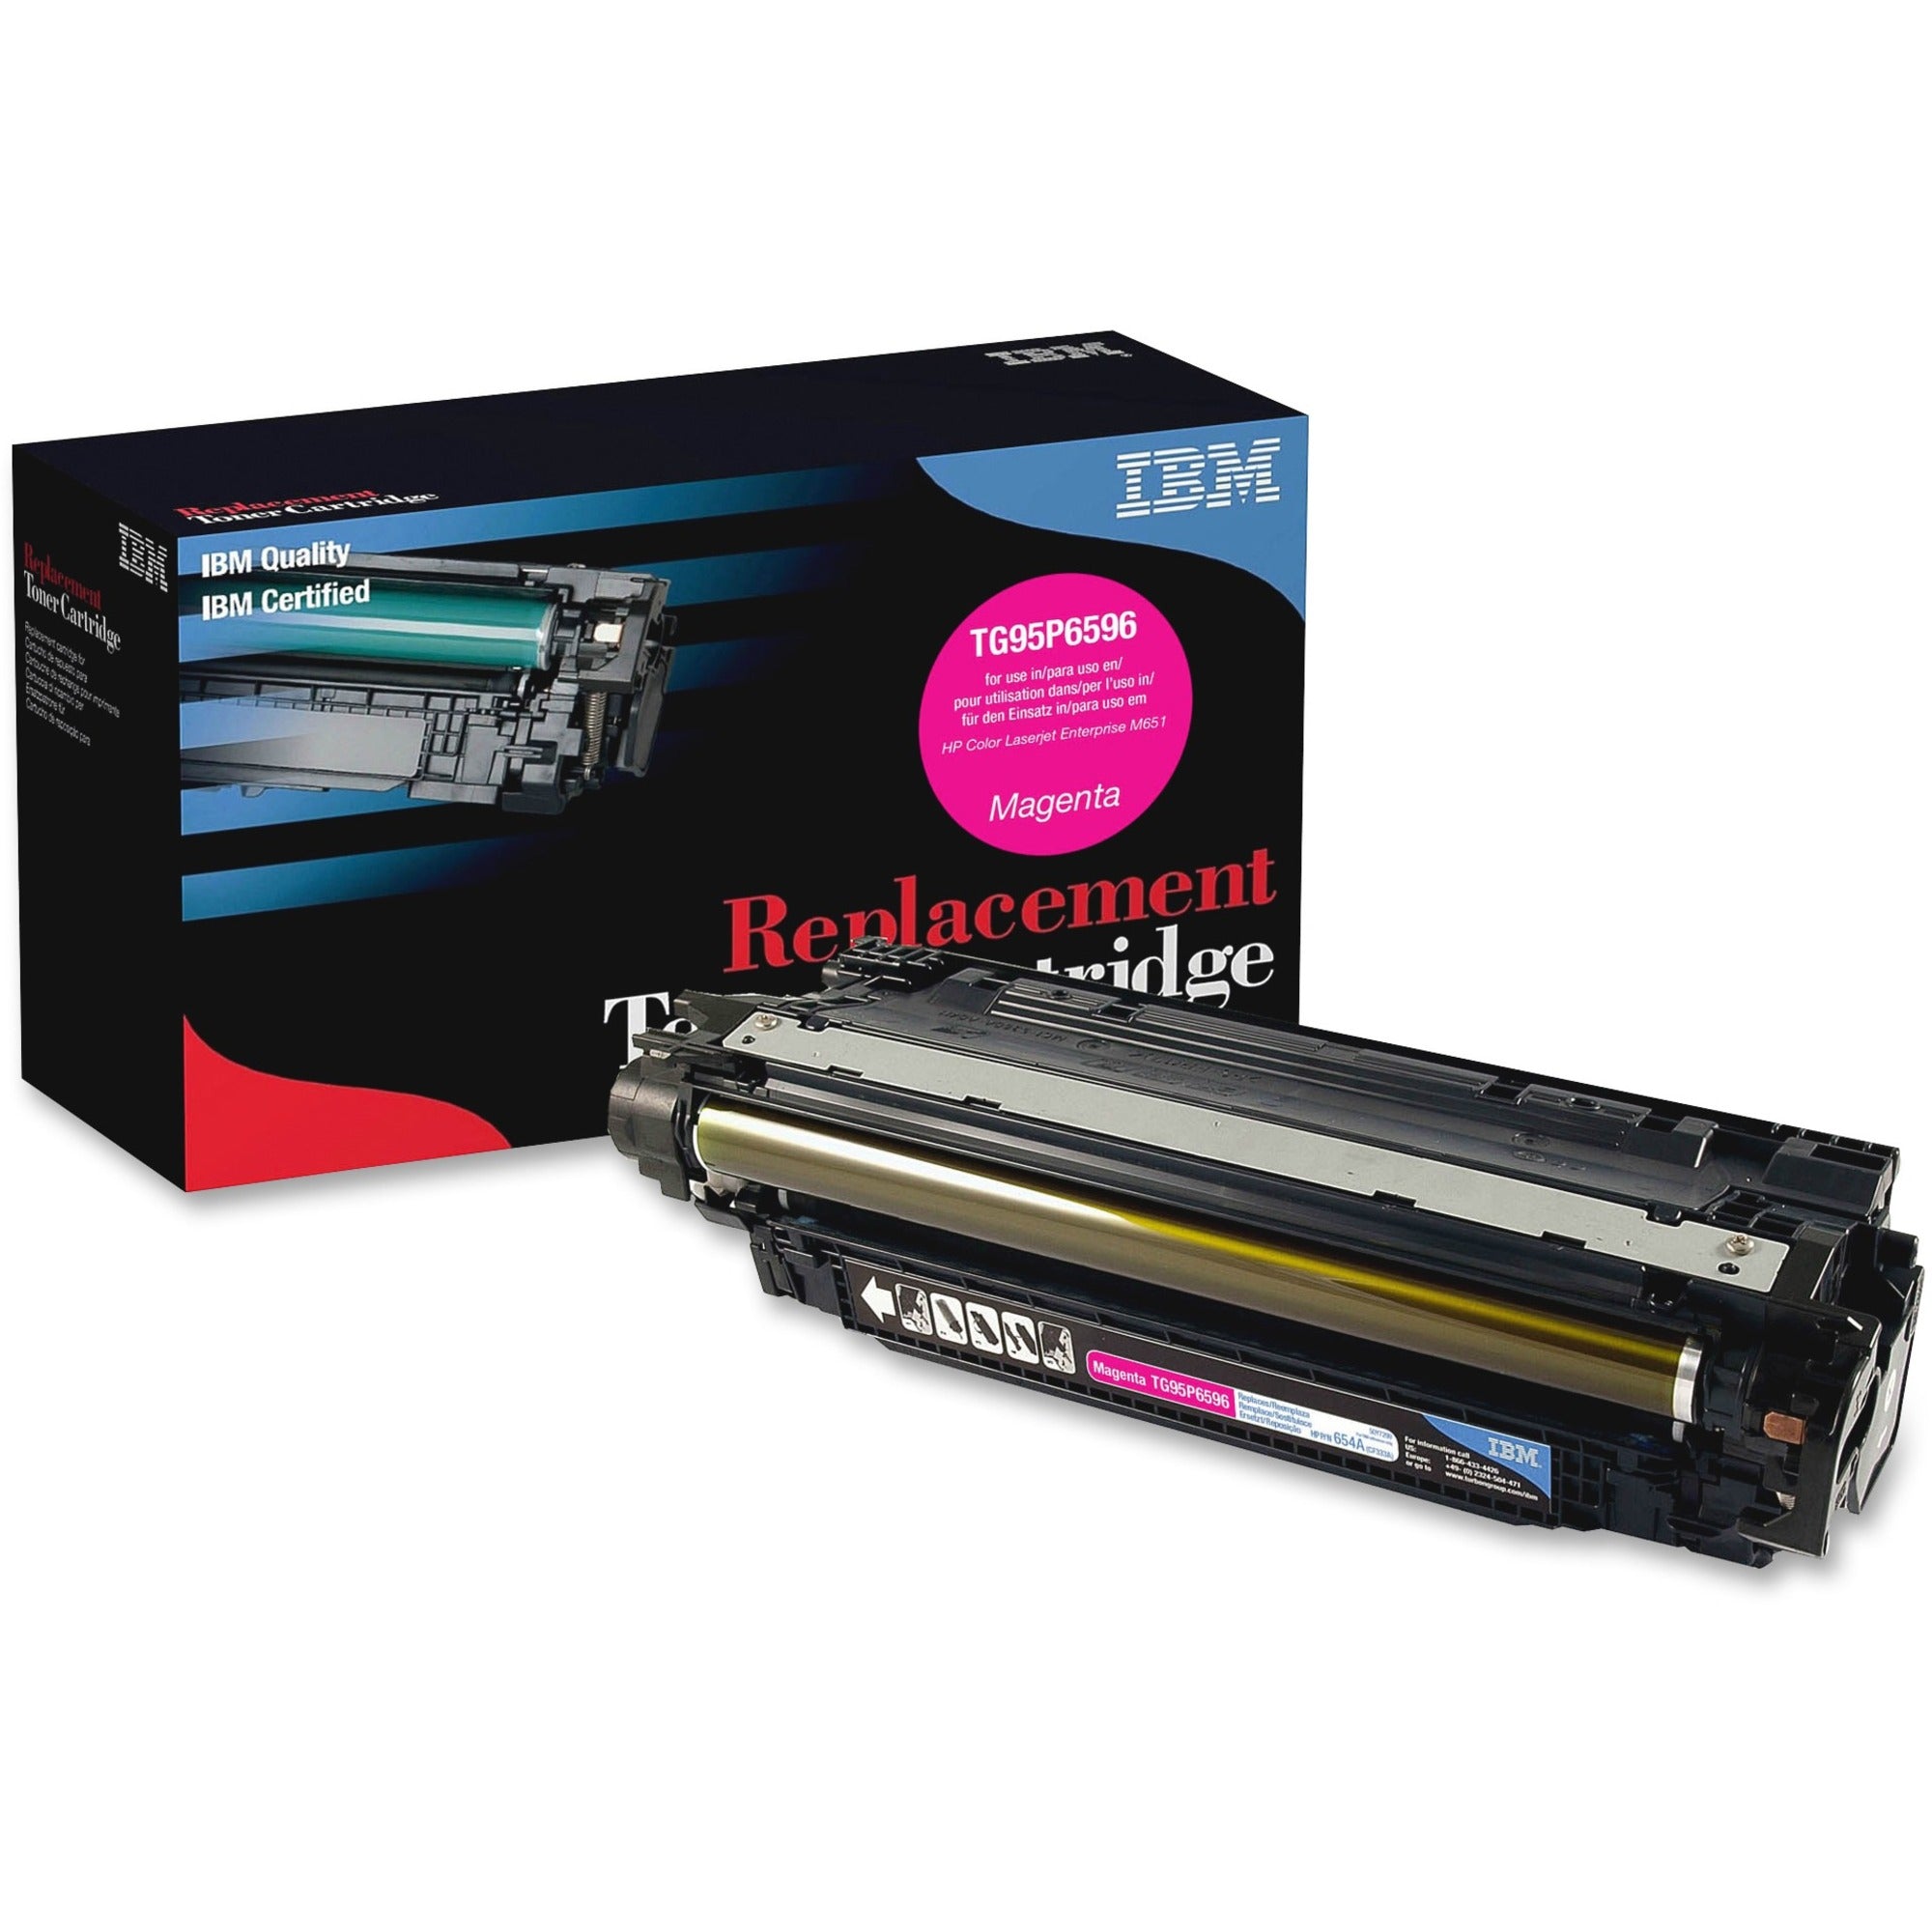 IBM Remanufactured Laser Toner Cartridge - Alternative for HP 654A (CF333A) - Magenta - 1 Each - 15000 Pages - 